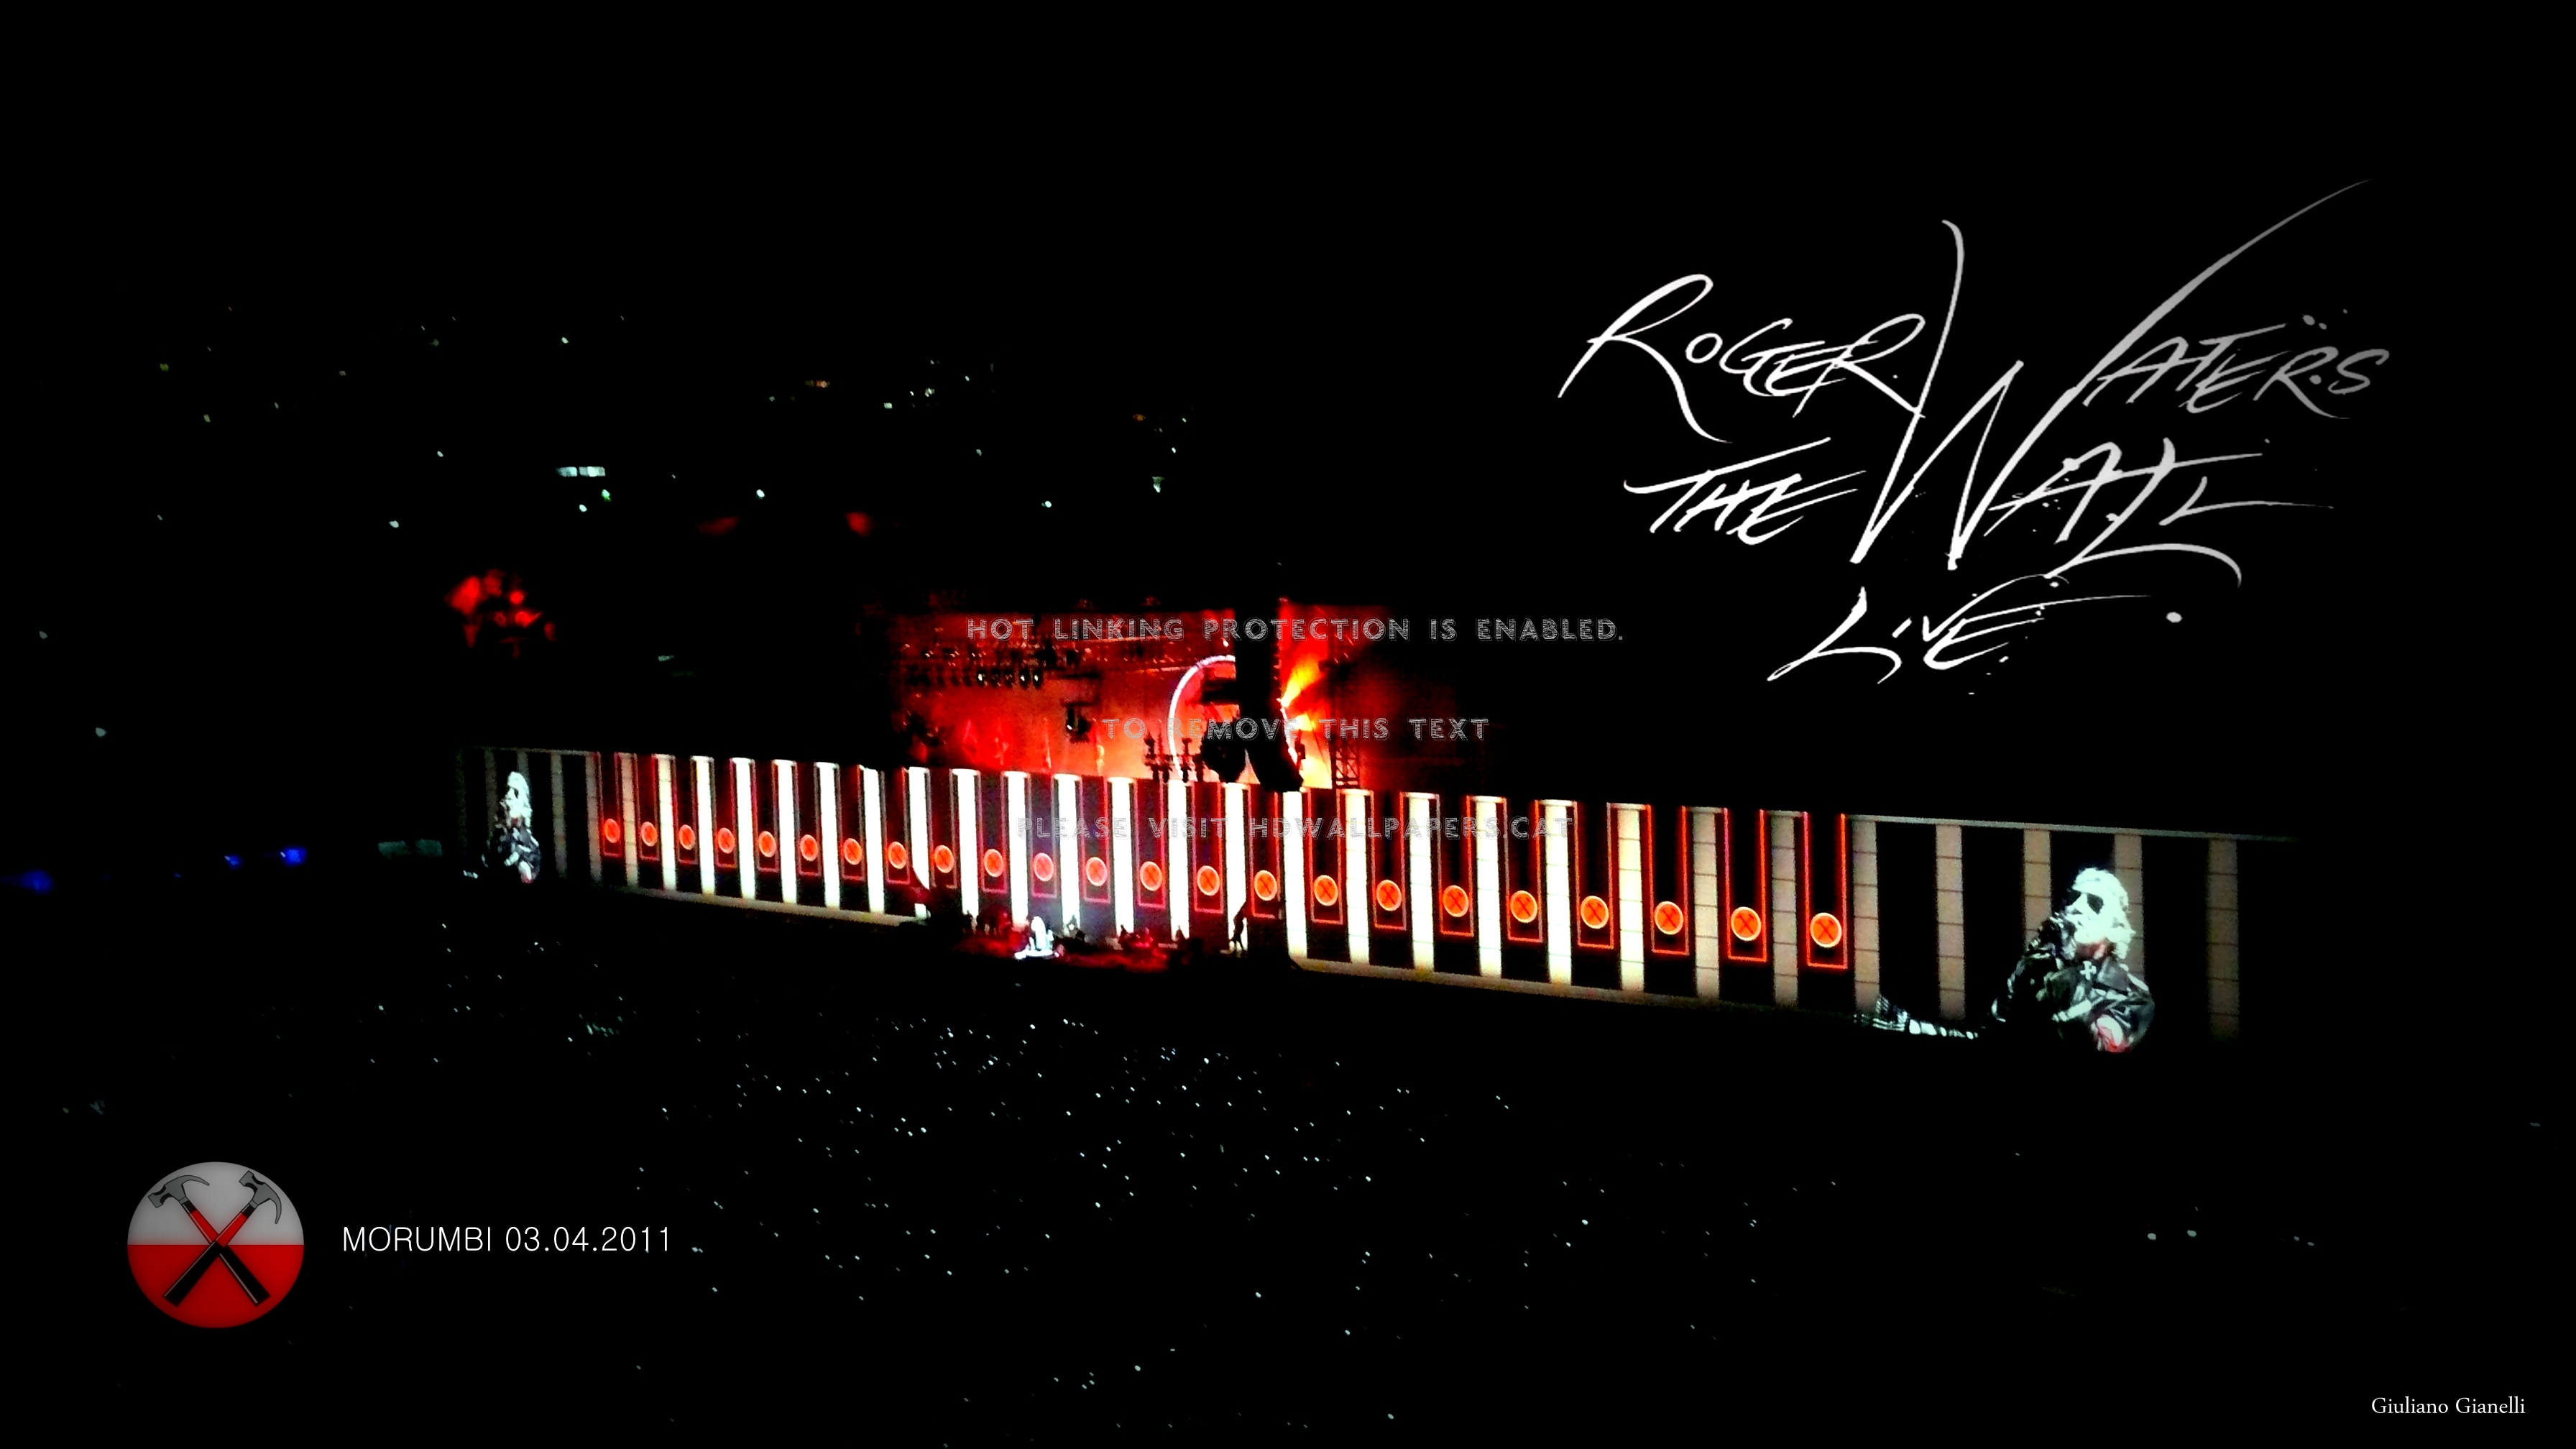 Roger Waters The Wall Pink Floyd Show Music - Darkness - HD Wallpaper 